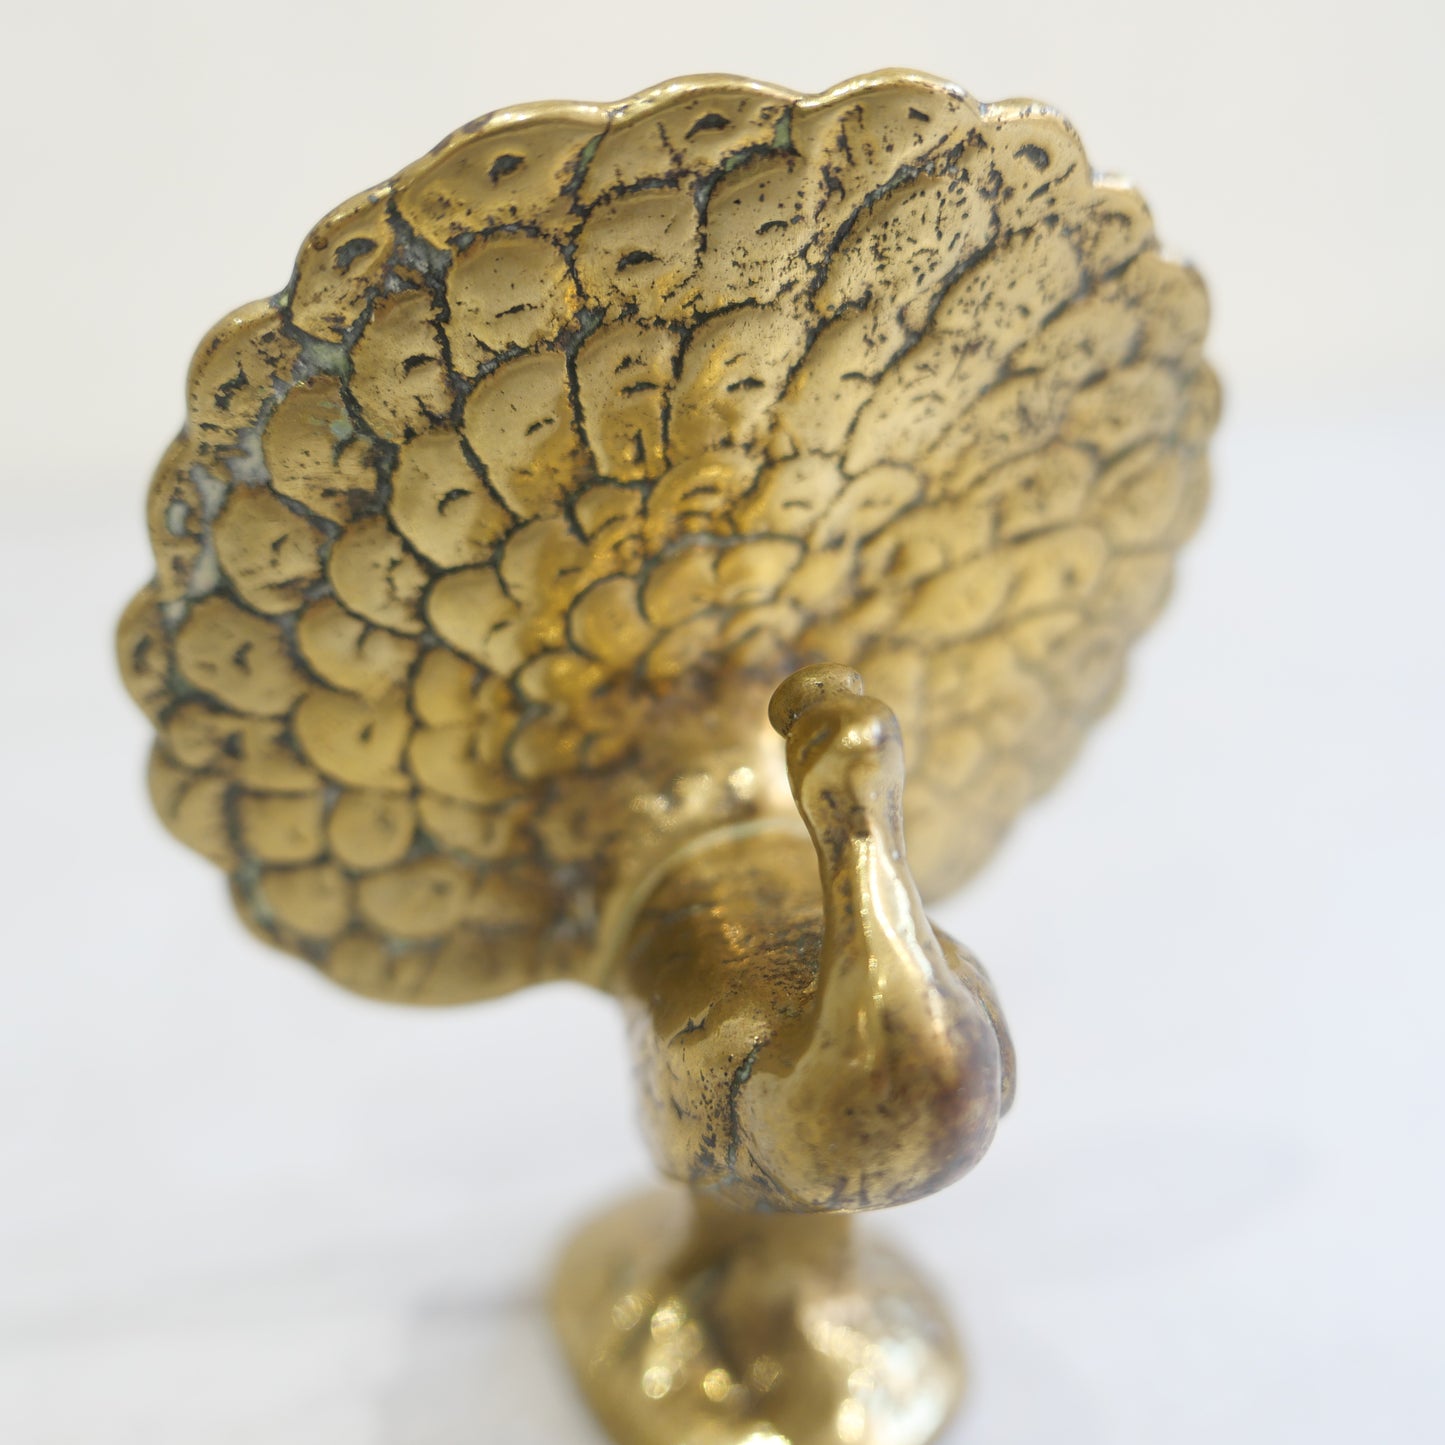 Vintage Brass Peacock Ornament or Paperweight 1950s